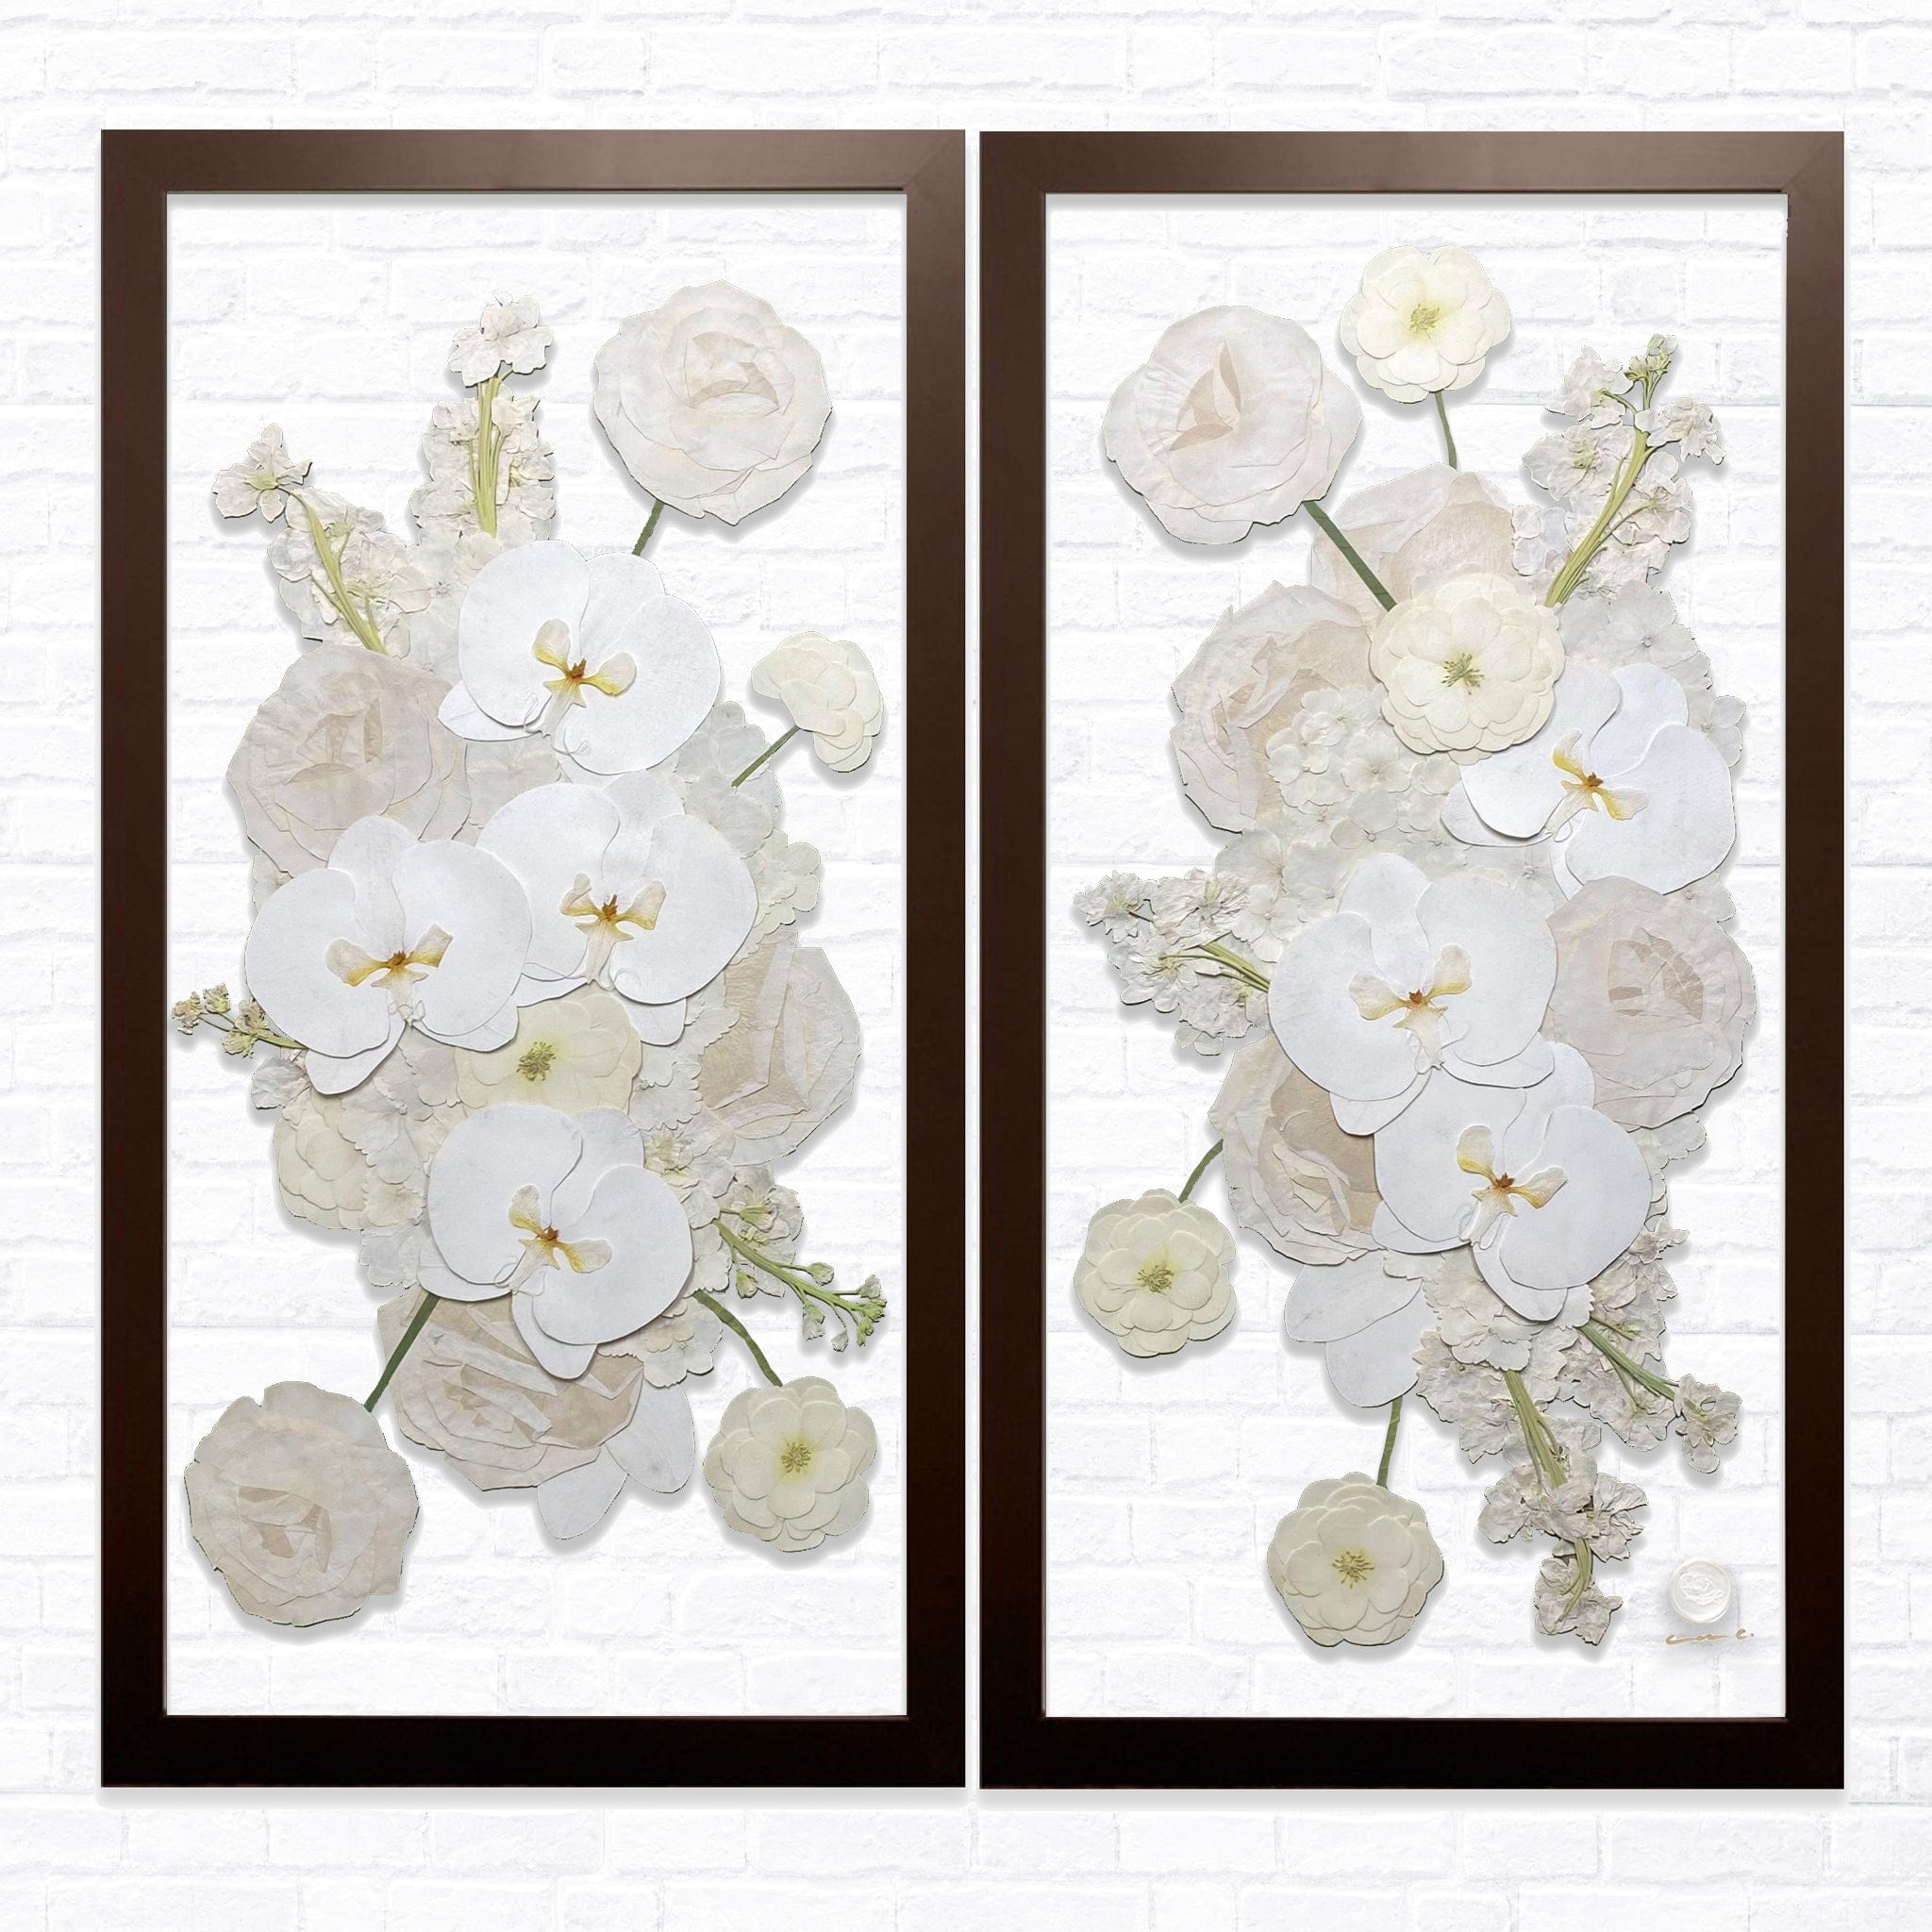 Designs by Andrea Pressed (Framed) Panel / 12" x 24" / Rectangle 12" x 24" Duo Panels Floating Frames